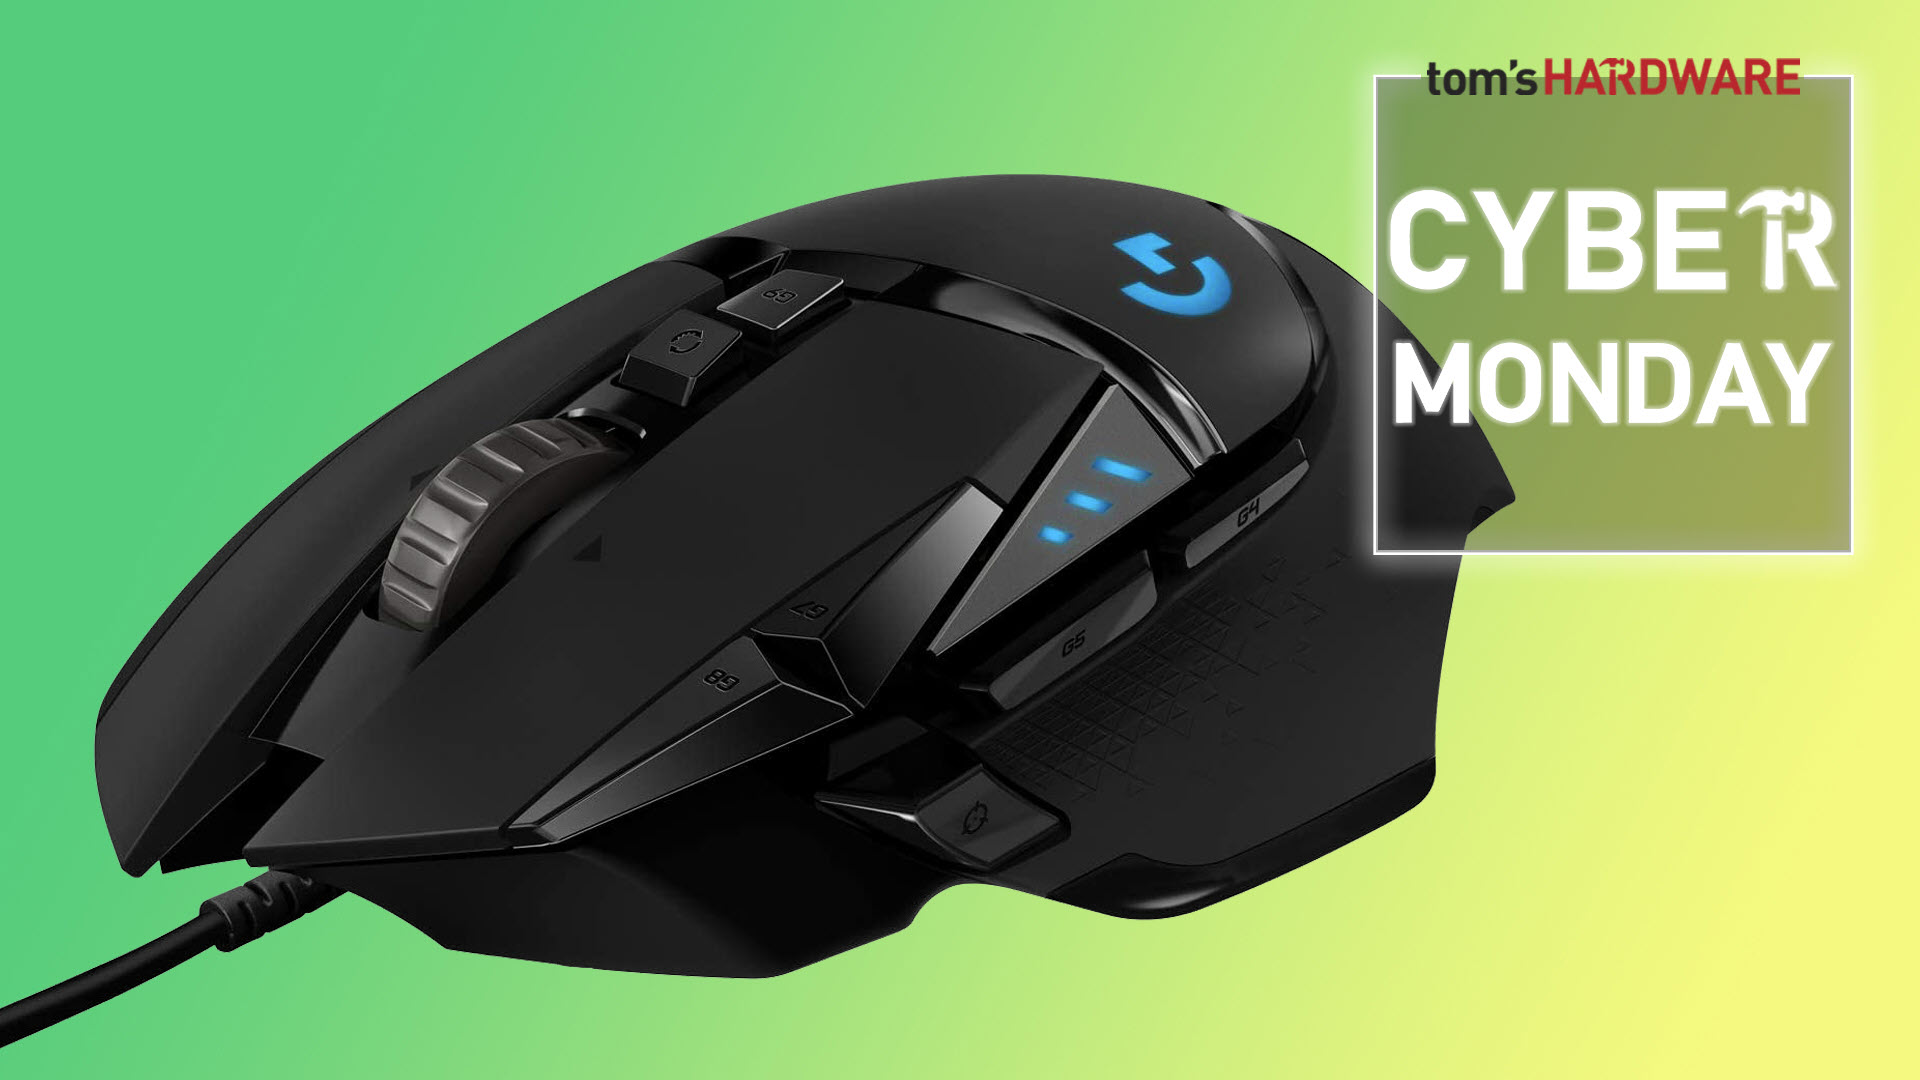 Logitech G502 Hero High Performance Gaming Mouse at best price in